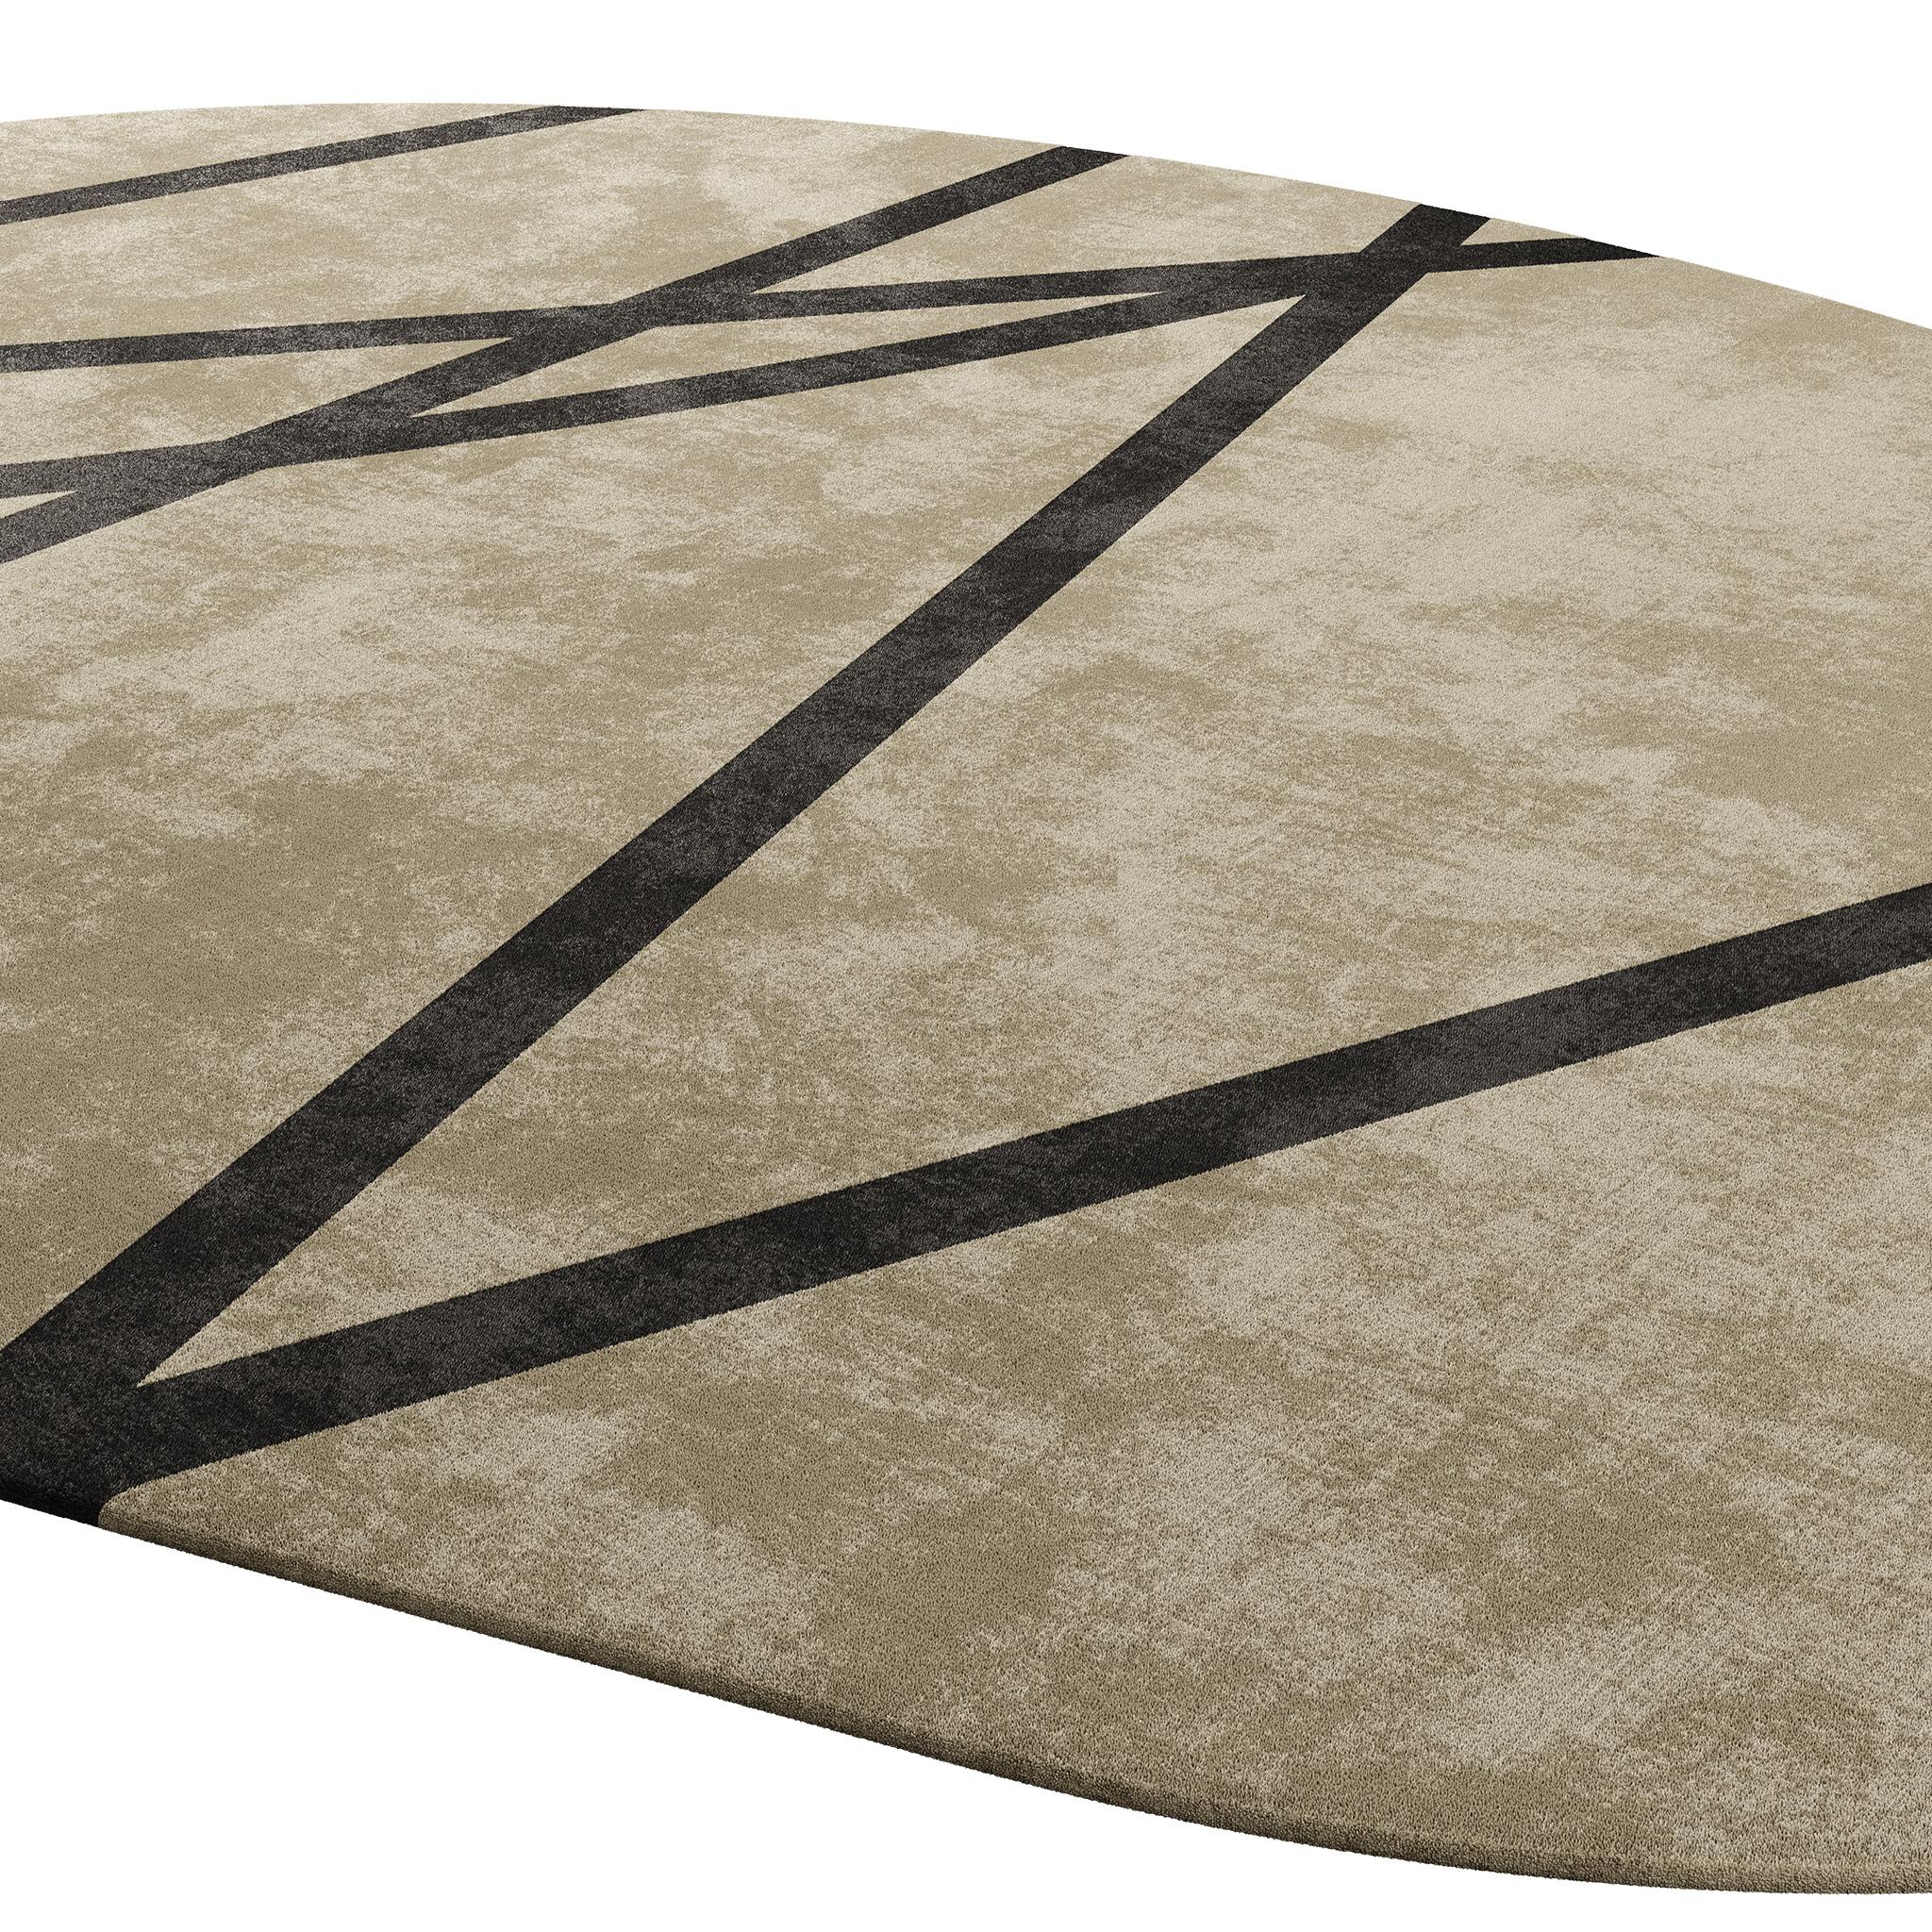 A contemporary modern rug, made of Lyocell, in a neutral color, suitable for any modern interior.
Fully customizable in color and dimensions, this product is suitable for any kind of interior project.
With a contemporary design, it stands out as a